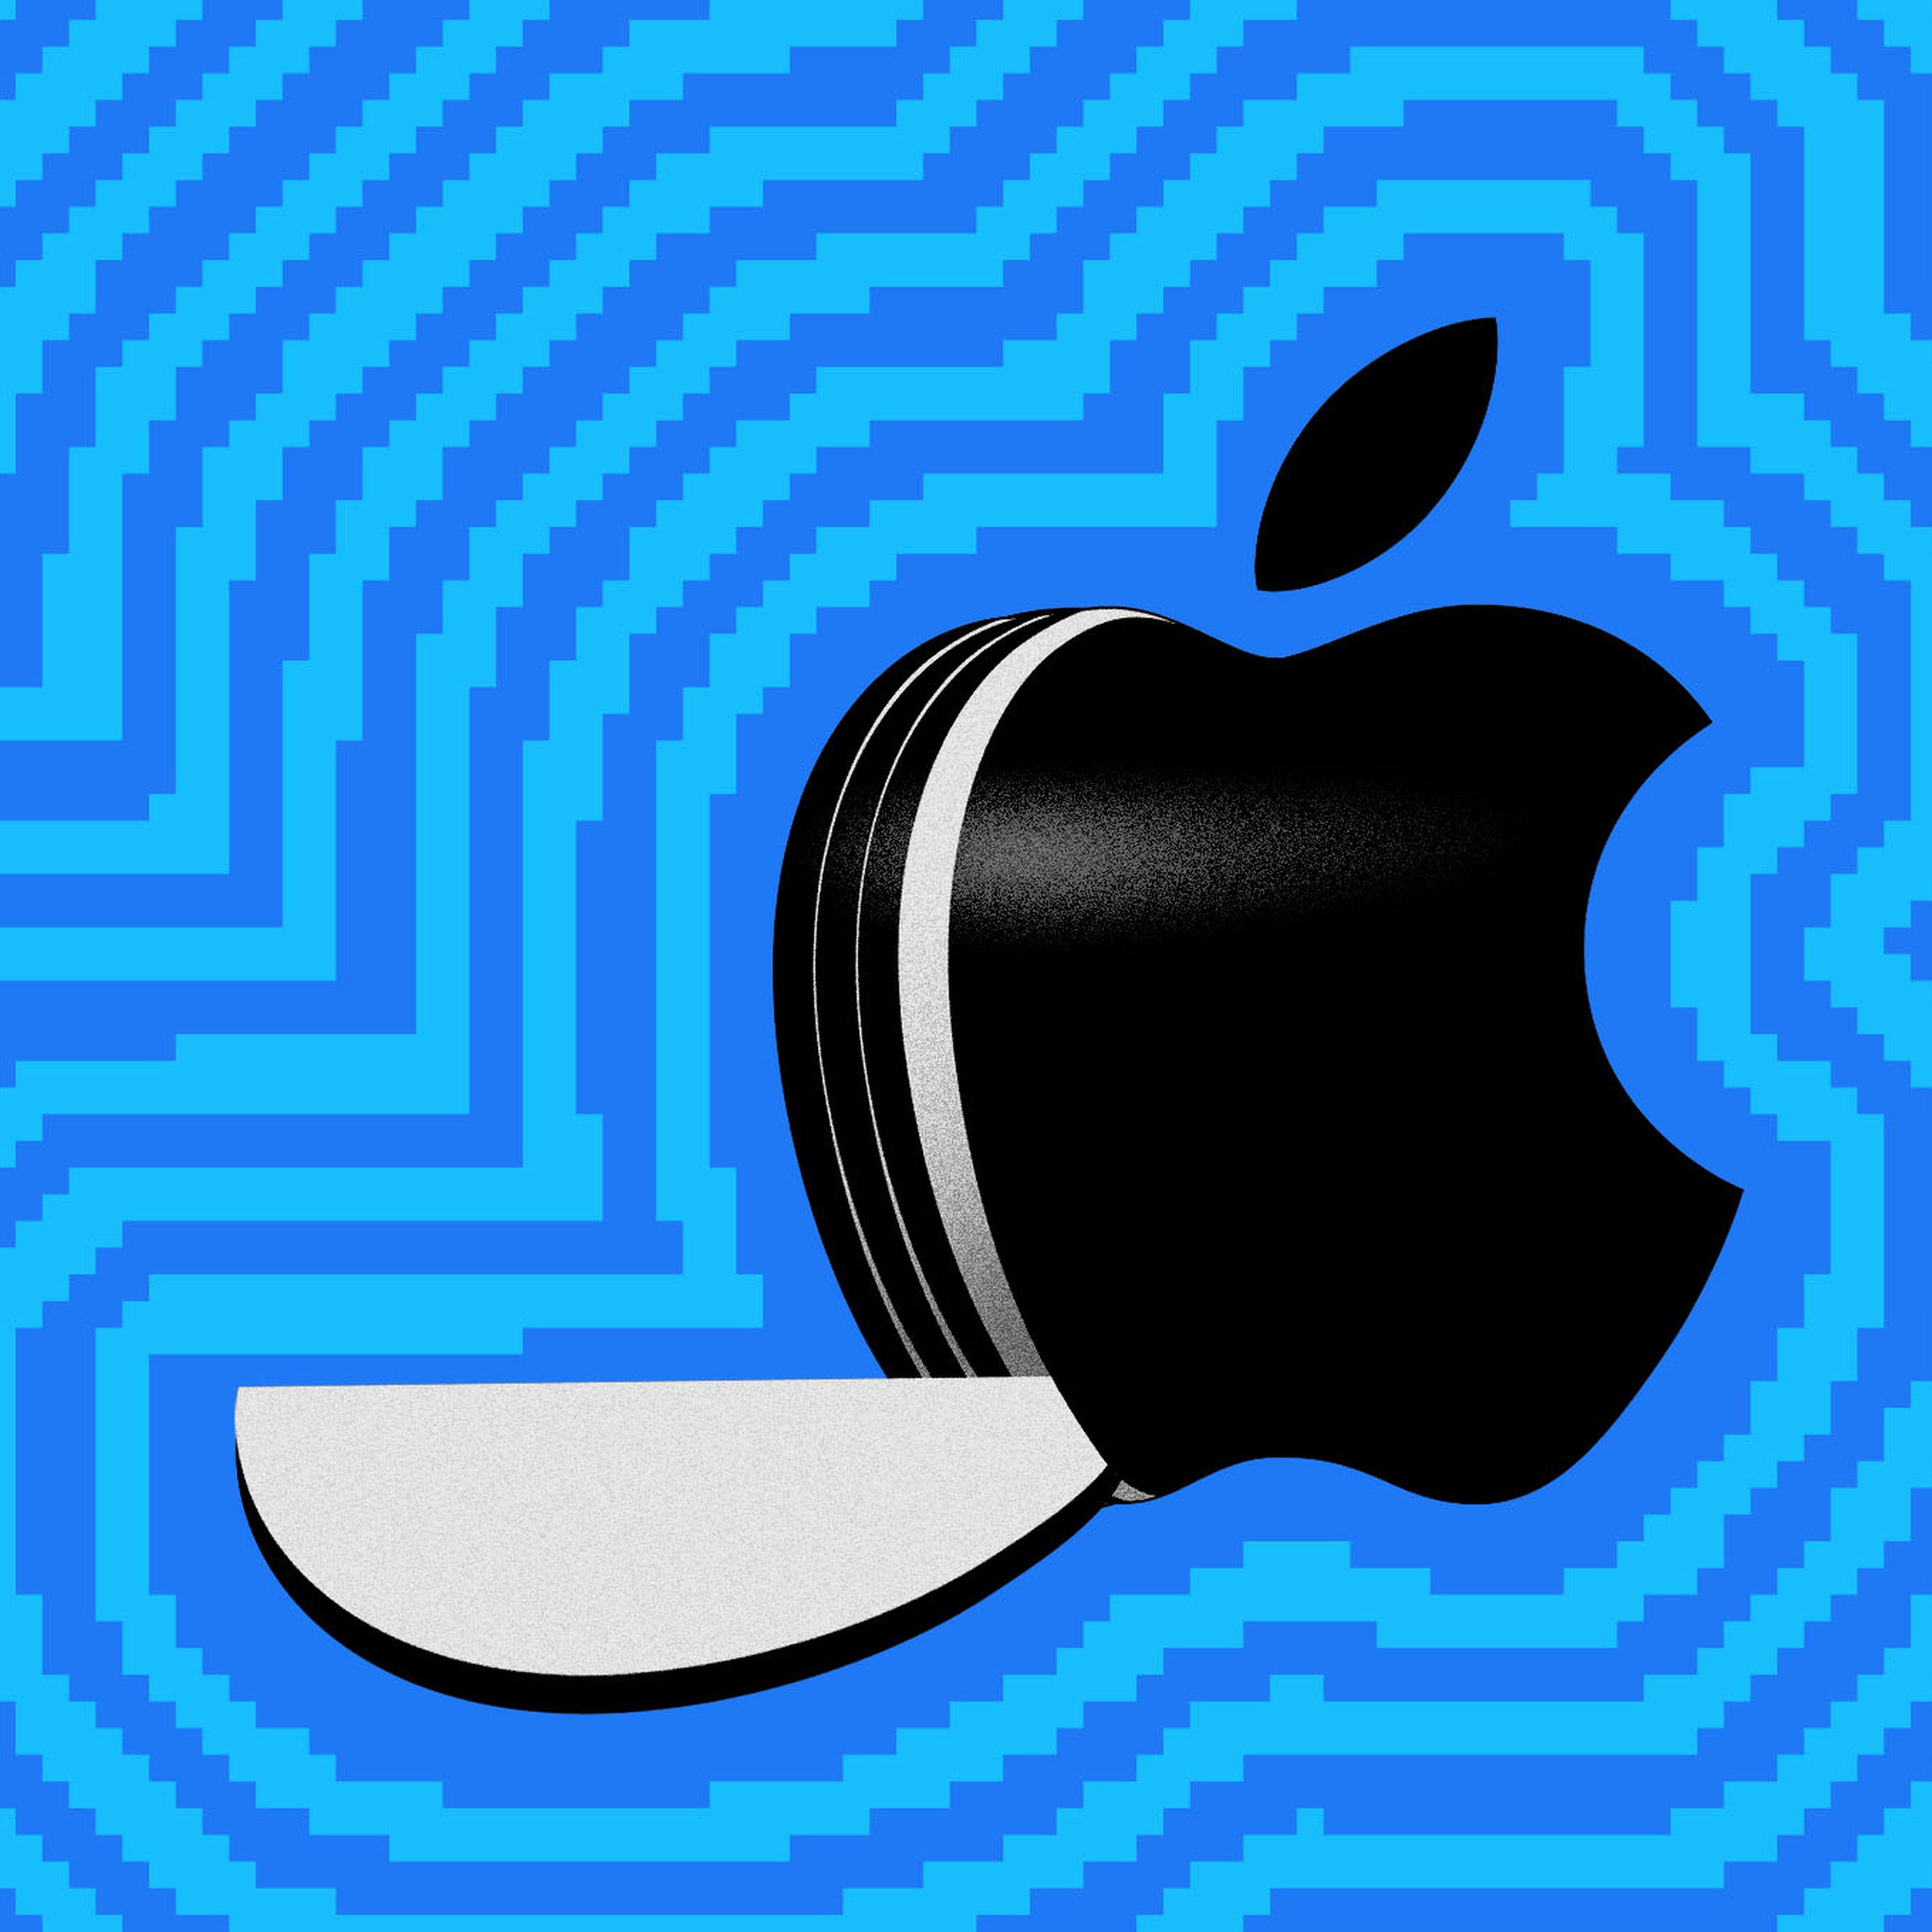 Illustration of the Apple logo with a slice falling out of it, implying breaking up a monopoly.